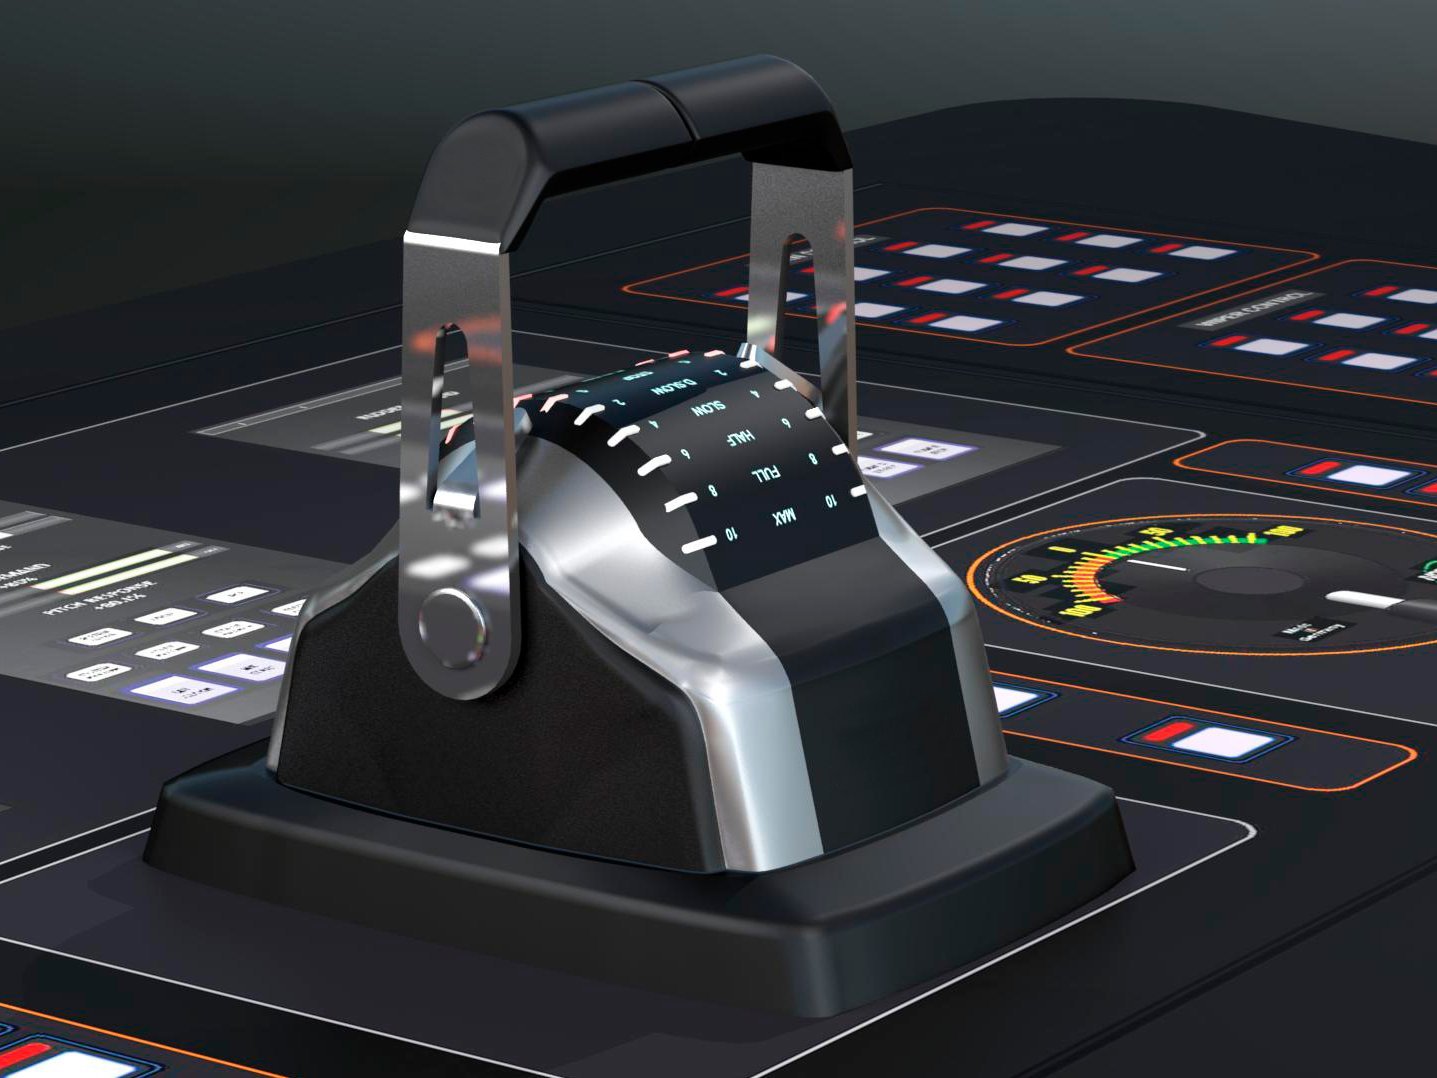 The image shows a 3D model of a unique propulsion control panel with control levers for Megayachts